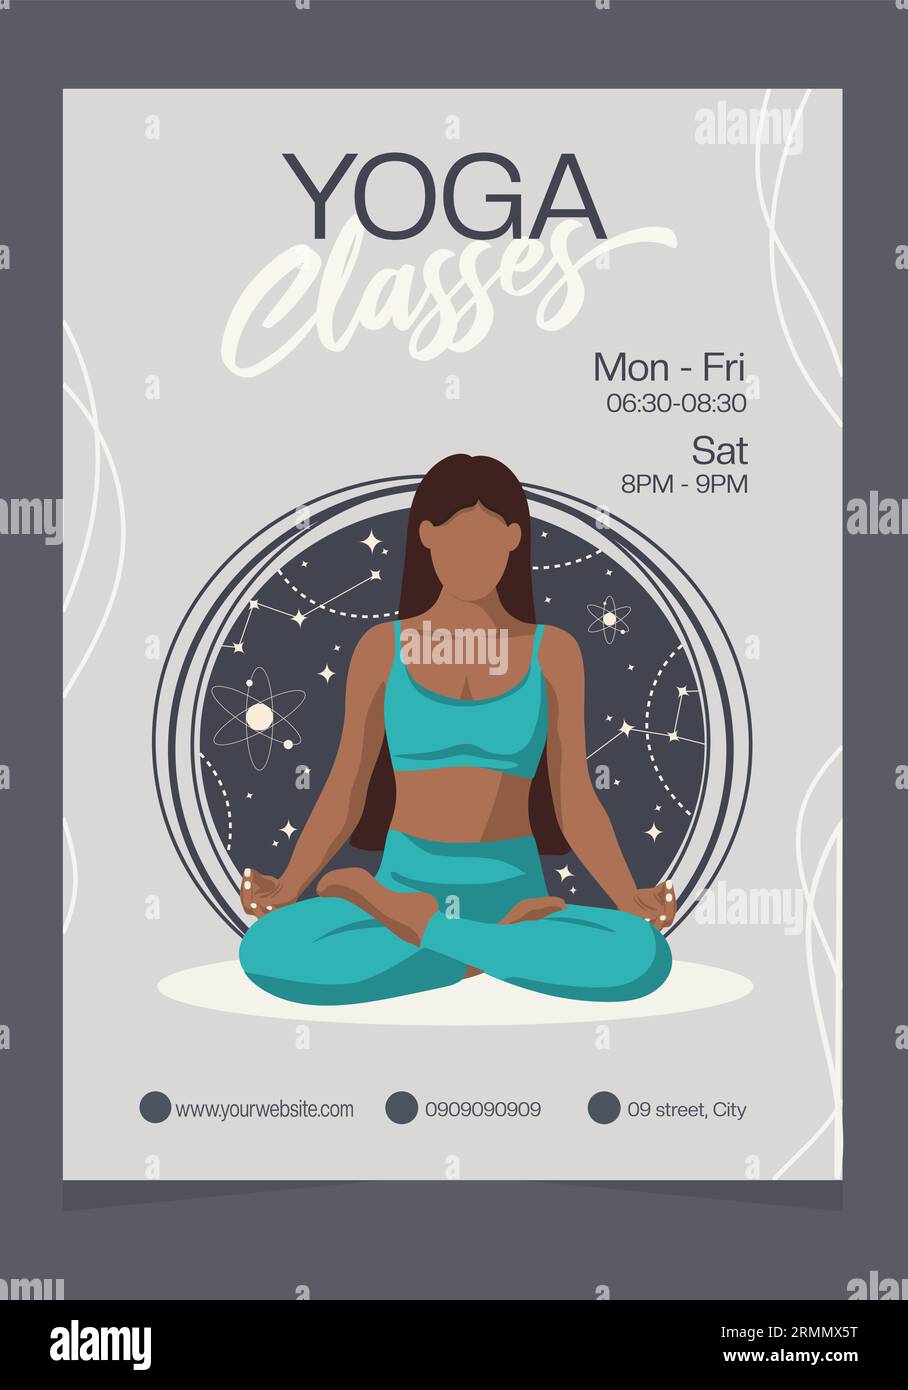 Yoga Class Flyer Layout Stock Template